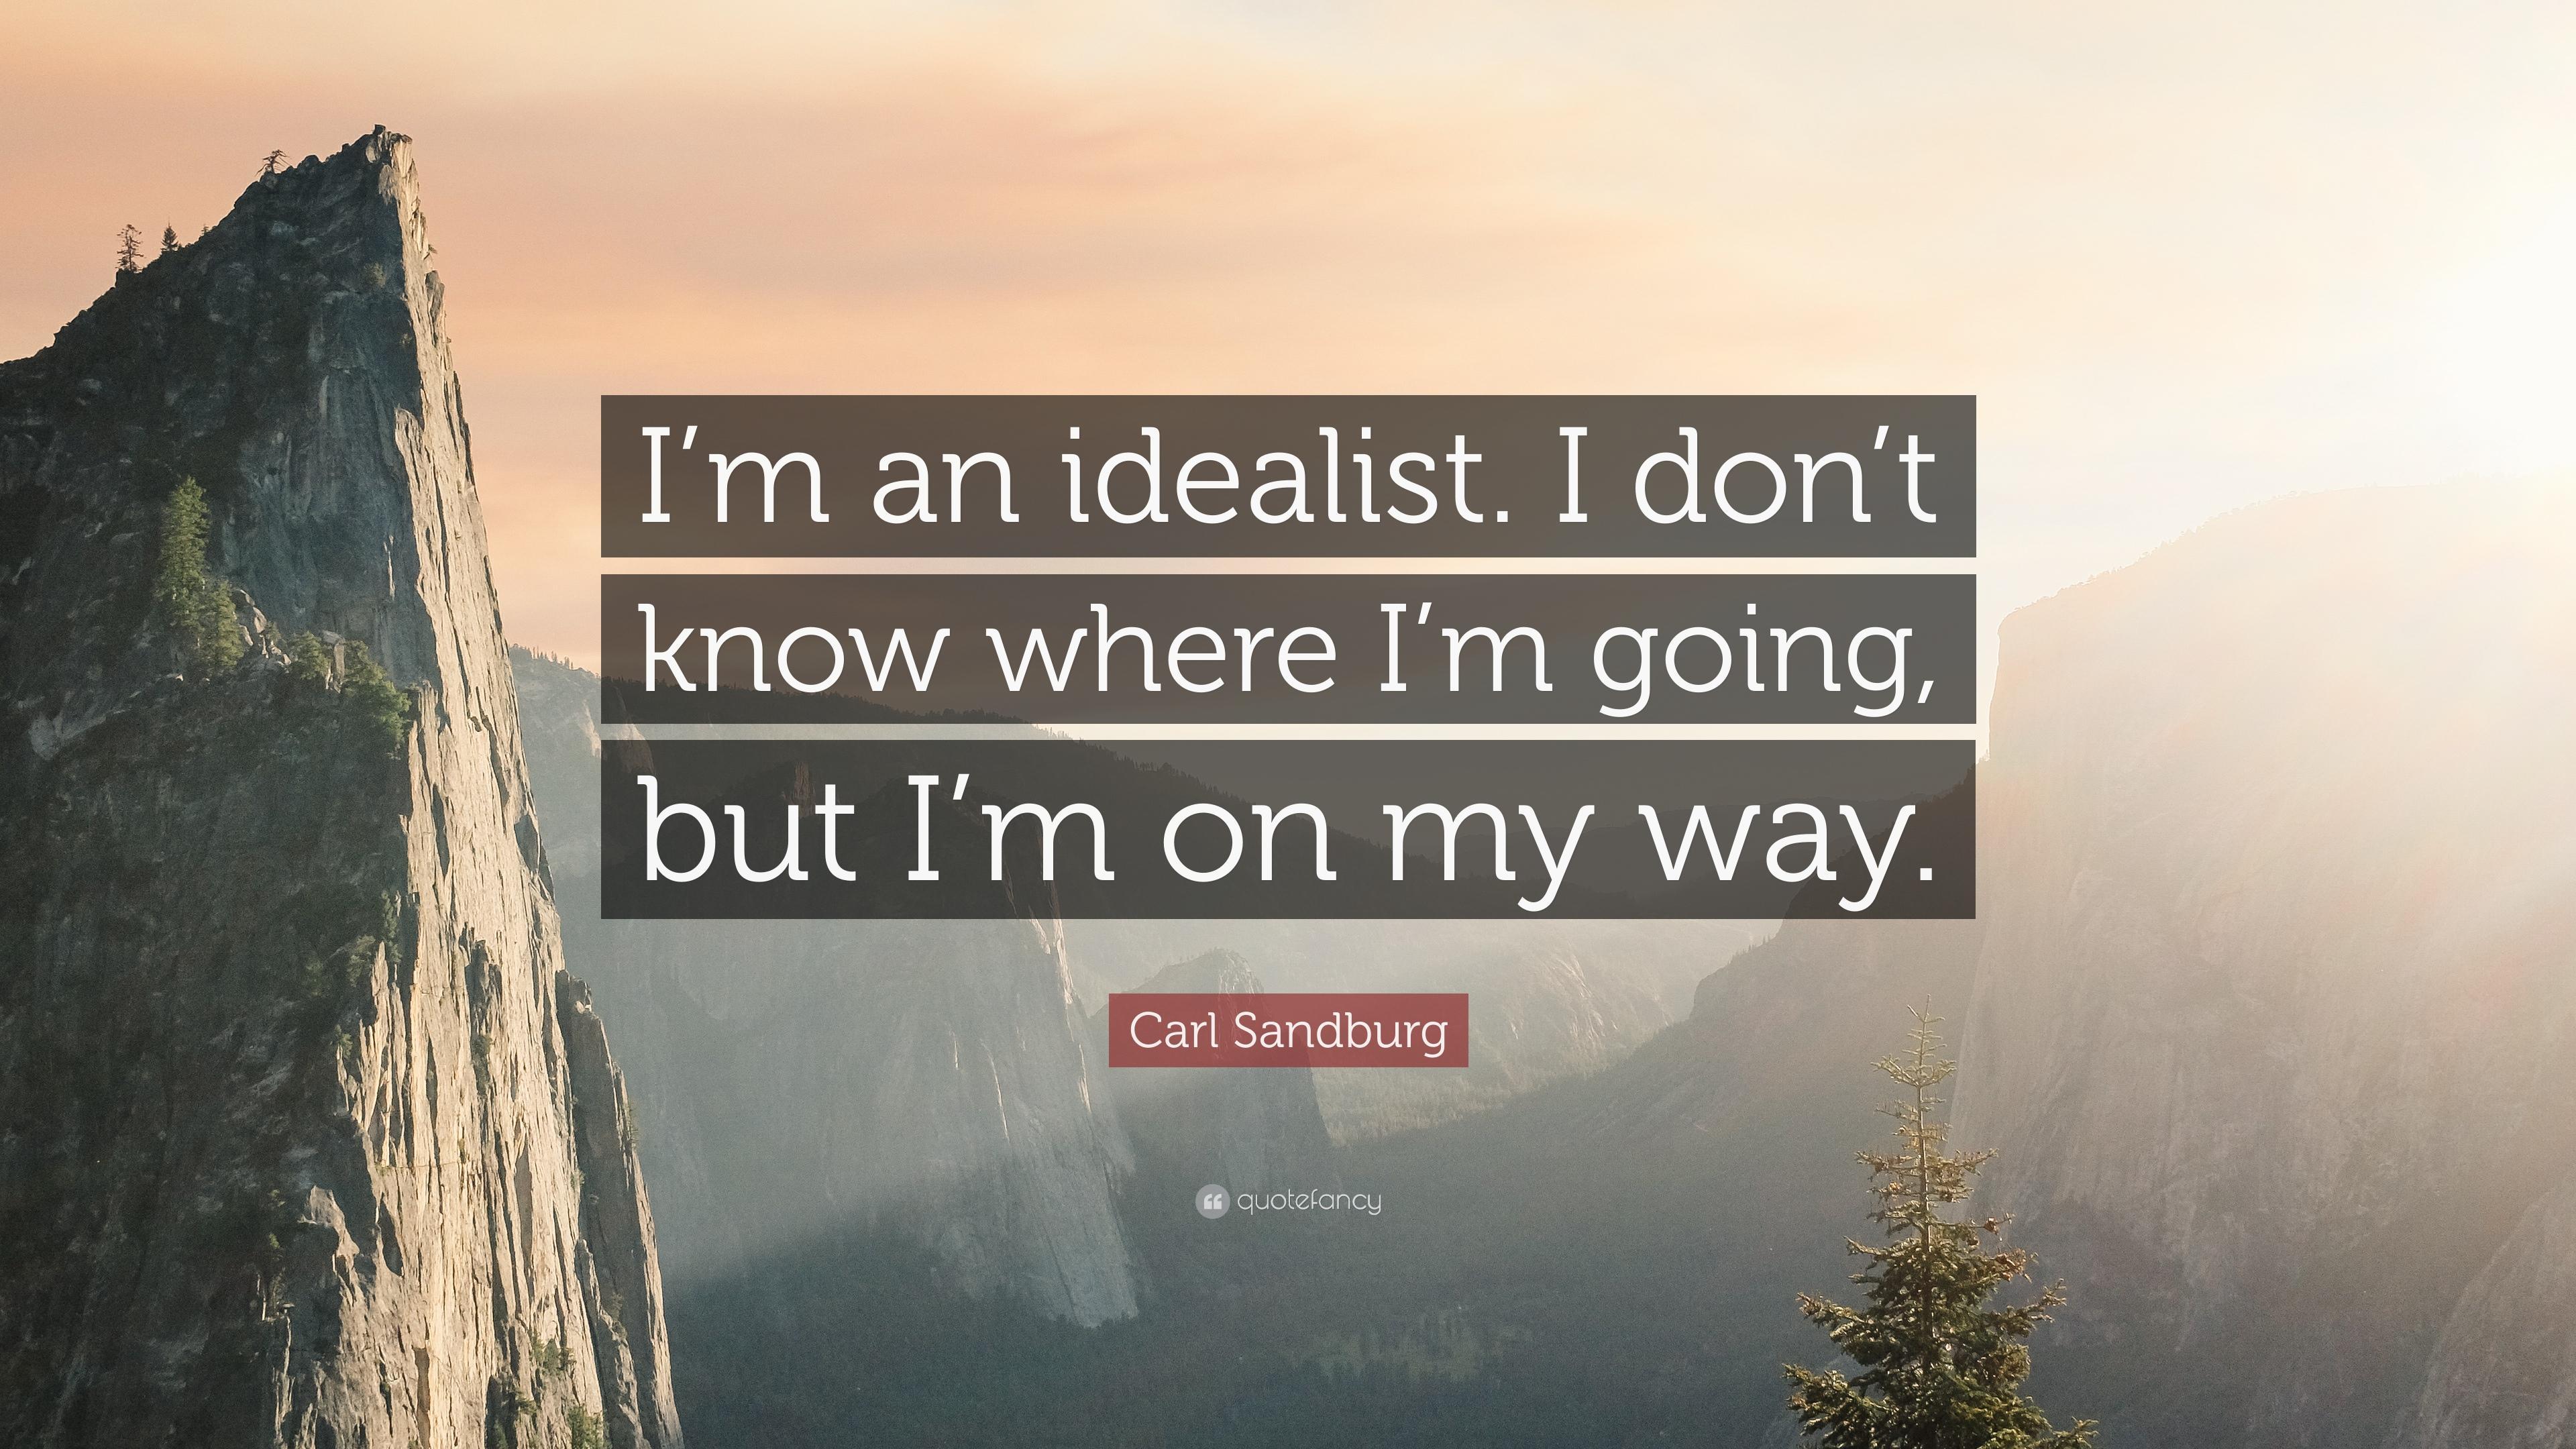 Carl Sandburg Quote: “I'm an idealist. I don't know where I'm going